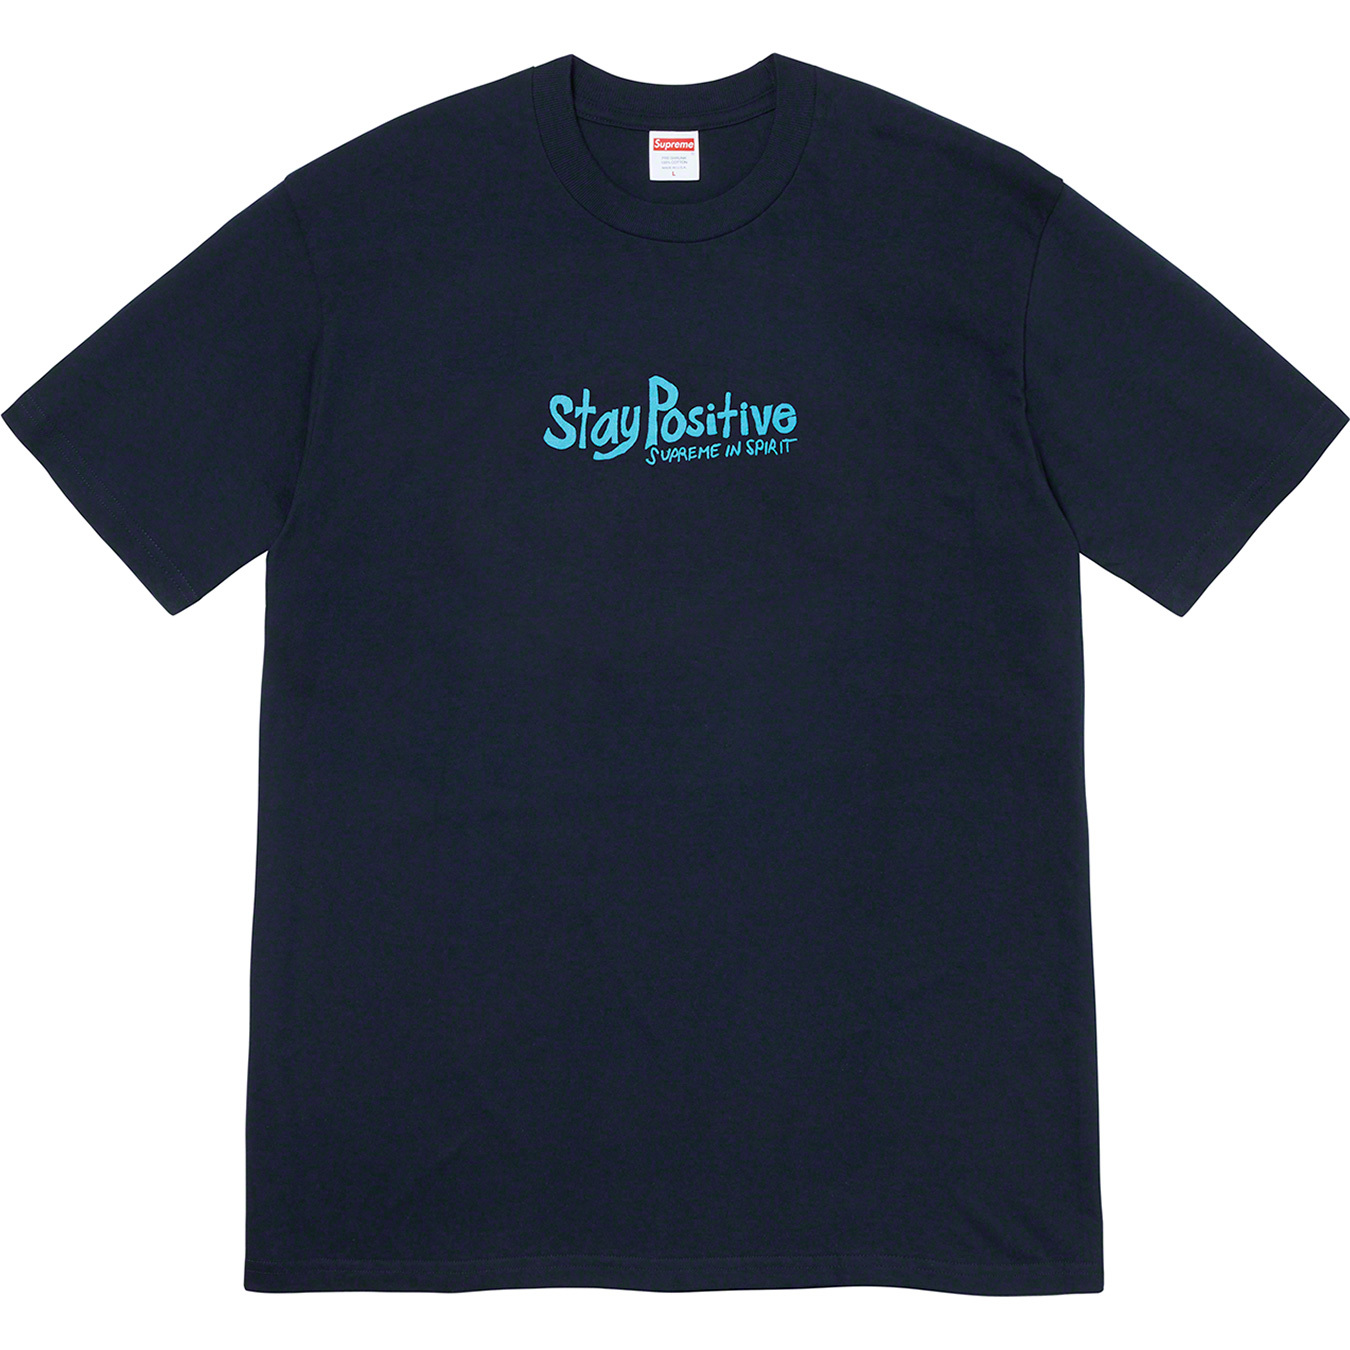 Stay Positive Tee - fall winter 2020 - Supreme